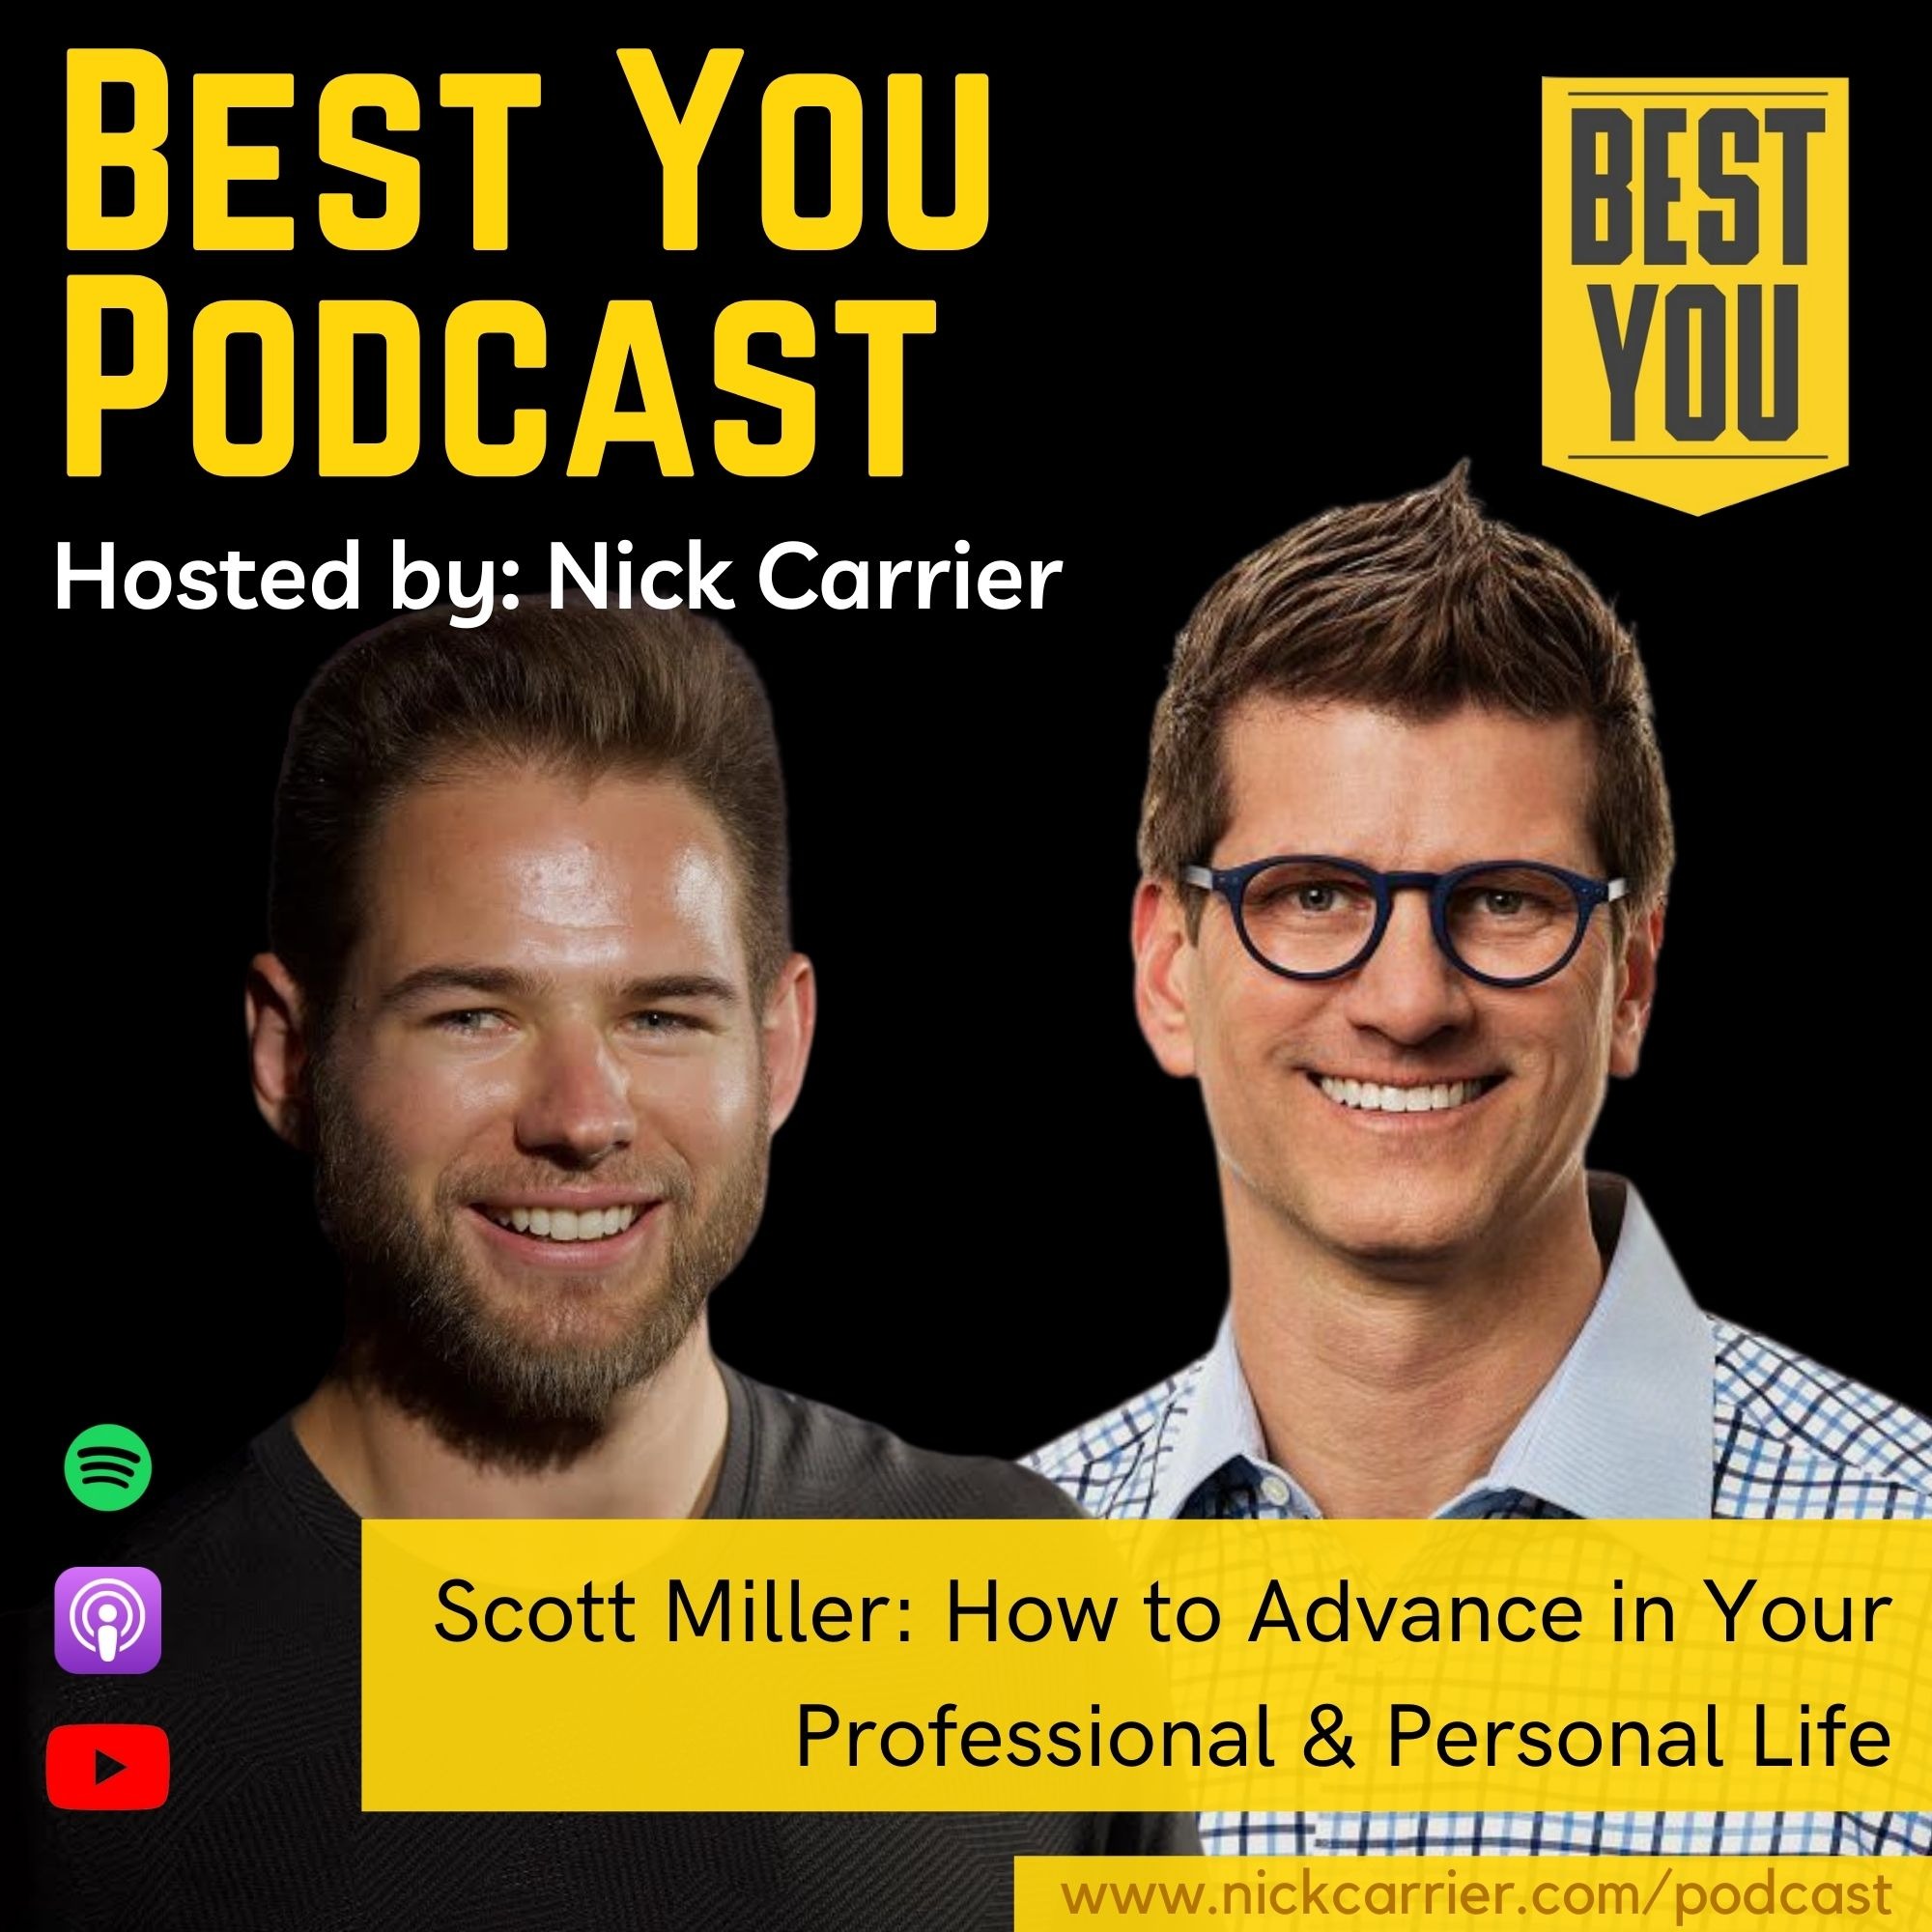 Scott Miller - The Everyday Guide to Navigate Your Professional Life